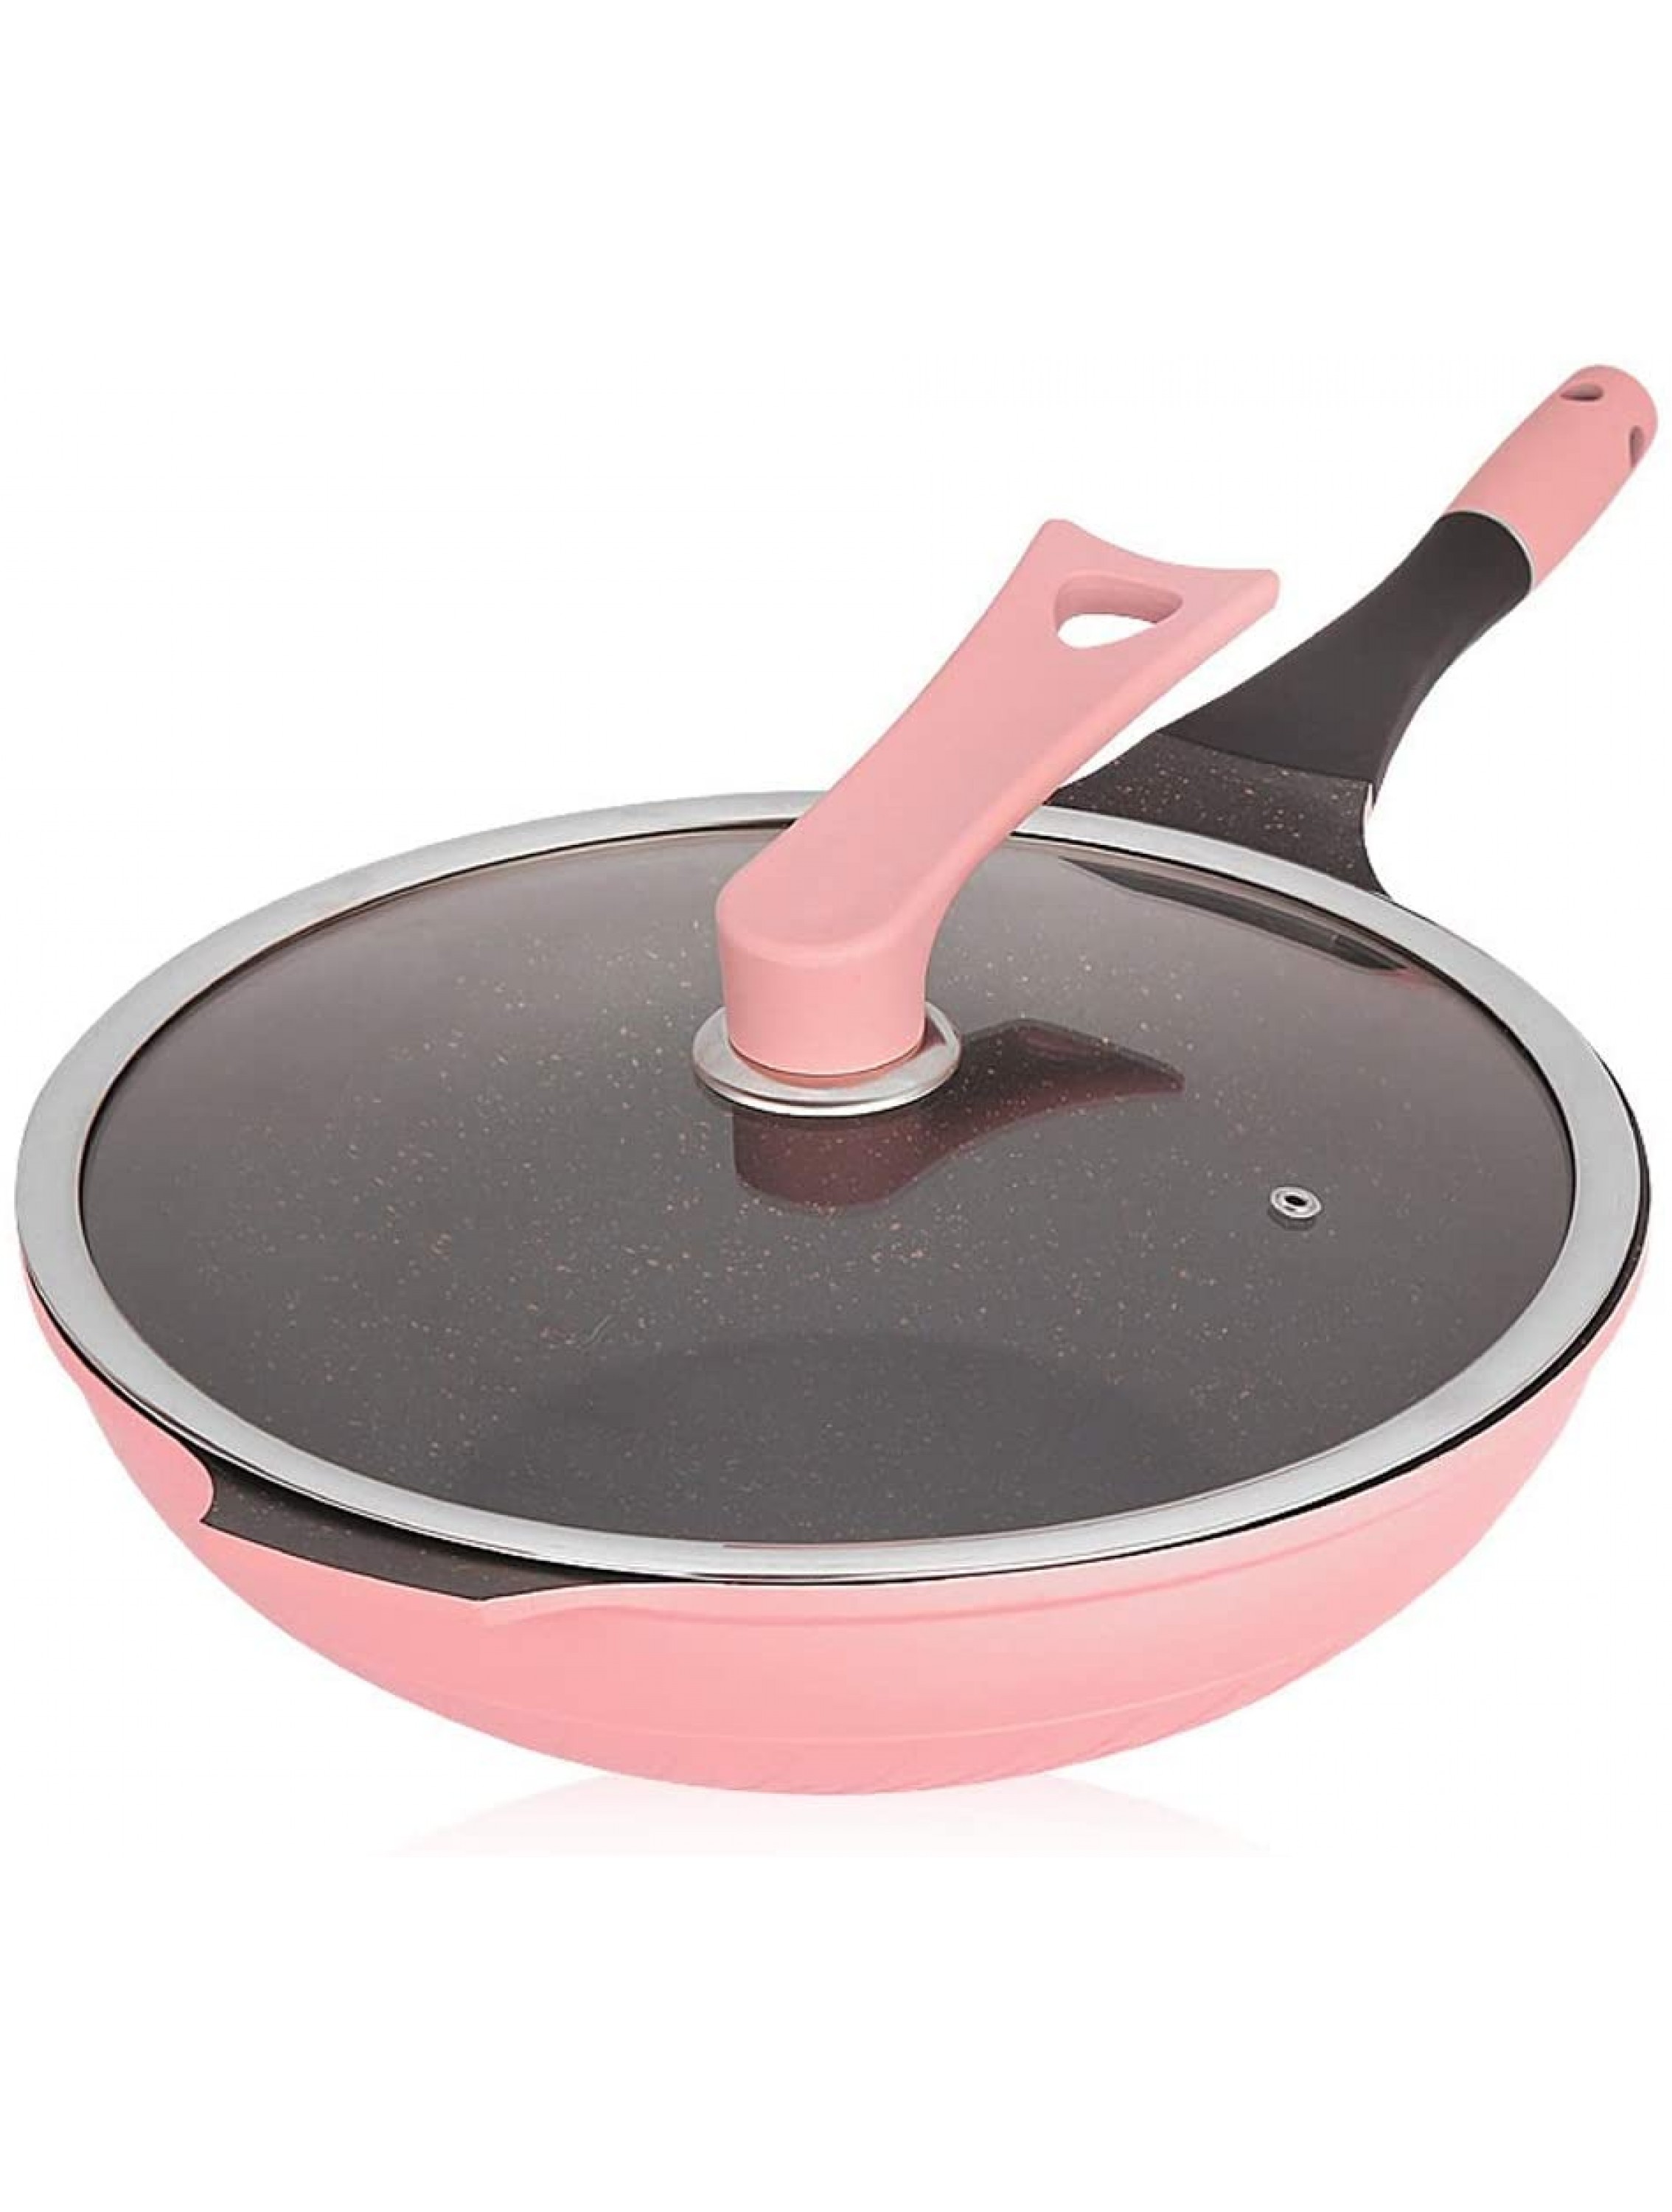 Pot Nonstick Thermo-Spot Heat Indicator Dishwasher Safe Inch Fry Pan Cookware Non-Stick Deep Sauté Chef Pan Dishwasher Safe Scratch Resistant with Easy Food Release Interior Silicone Handle and Eve - BNEMT5X5H